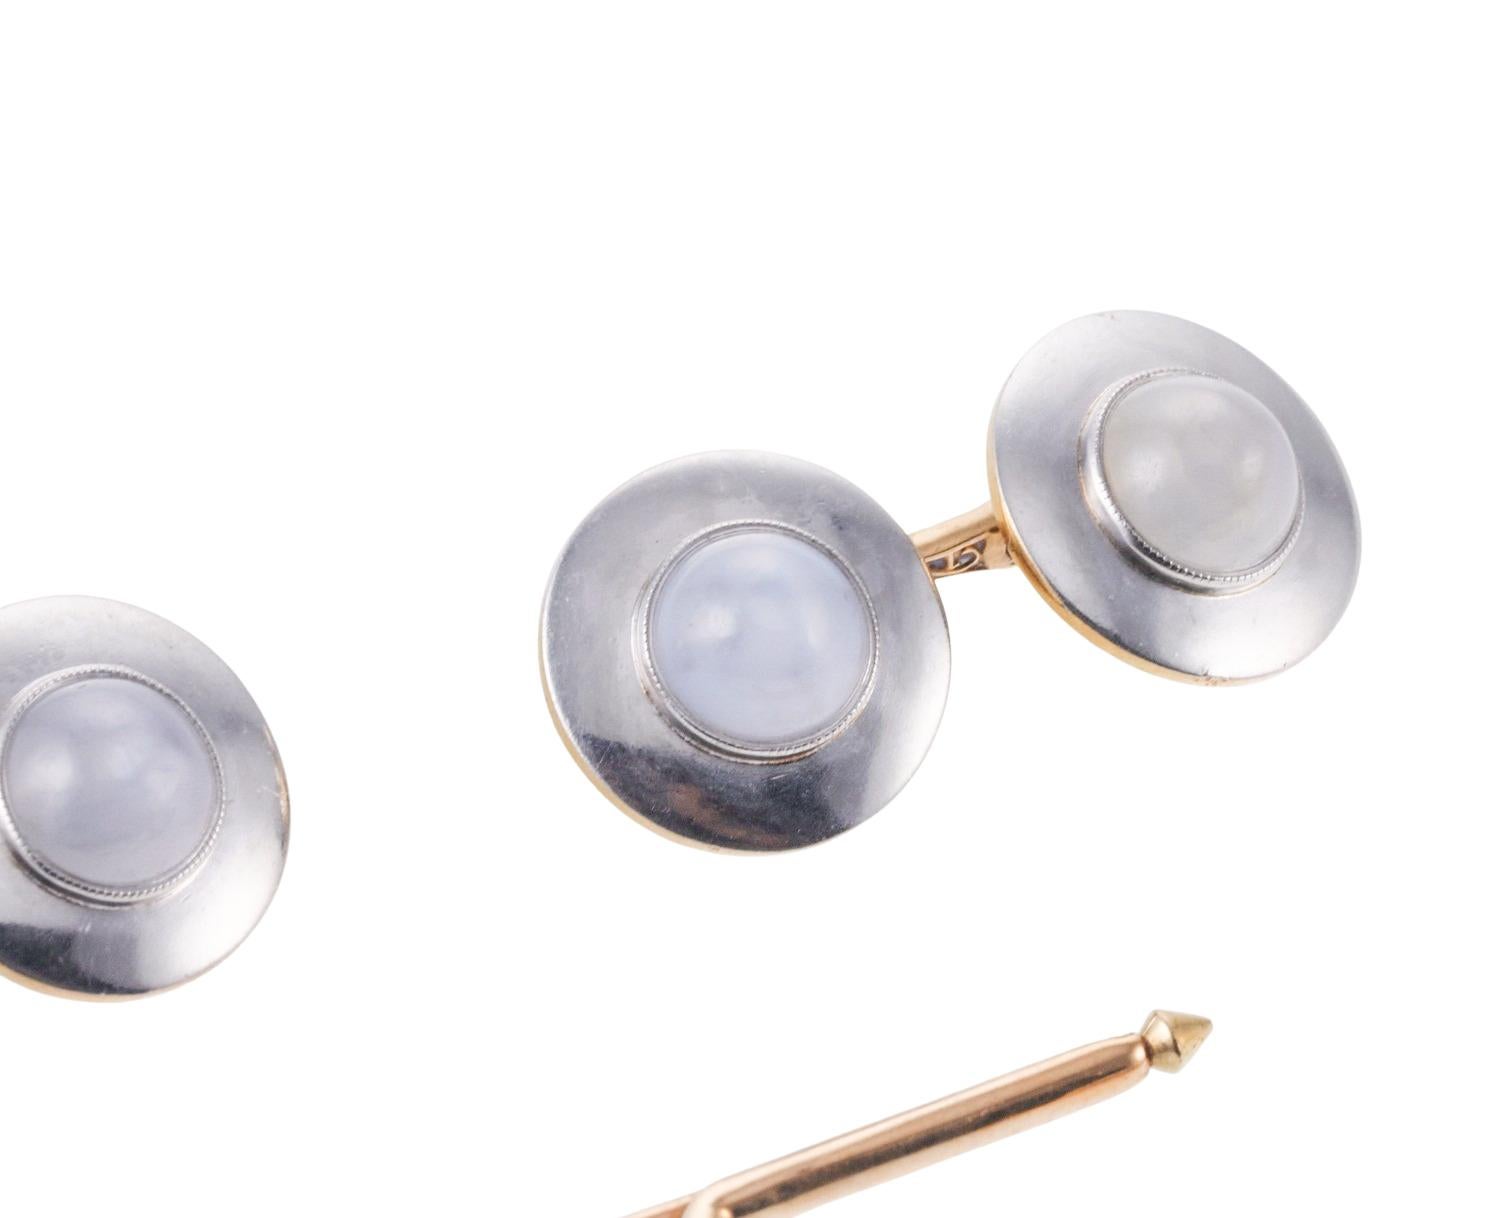 Midcentury Retro 14k gold cufflinks and studs set, with star sapphire cabochons. Each cufflink top is 14mm in diameter, stud - 6.5mm in diameter. Marked 14 on the connecting hardware. Weight - 14.4 grams. 